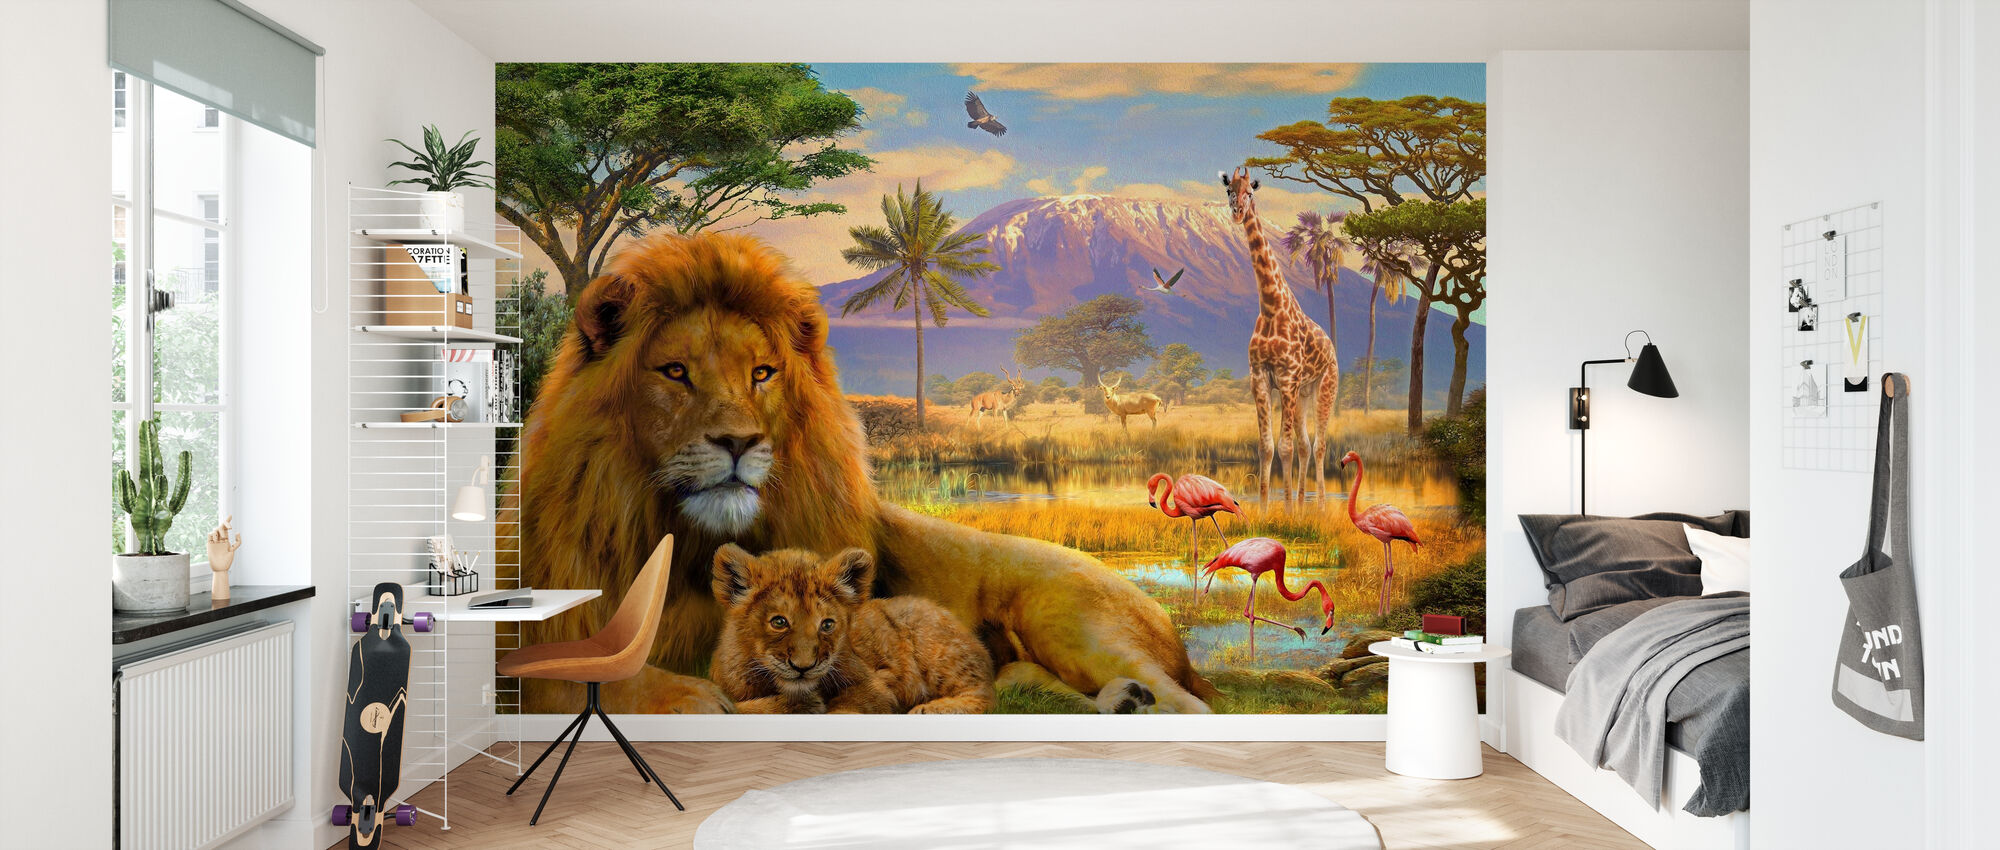 Lion – made-to-measure wall mural – Photowall